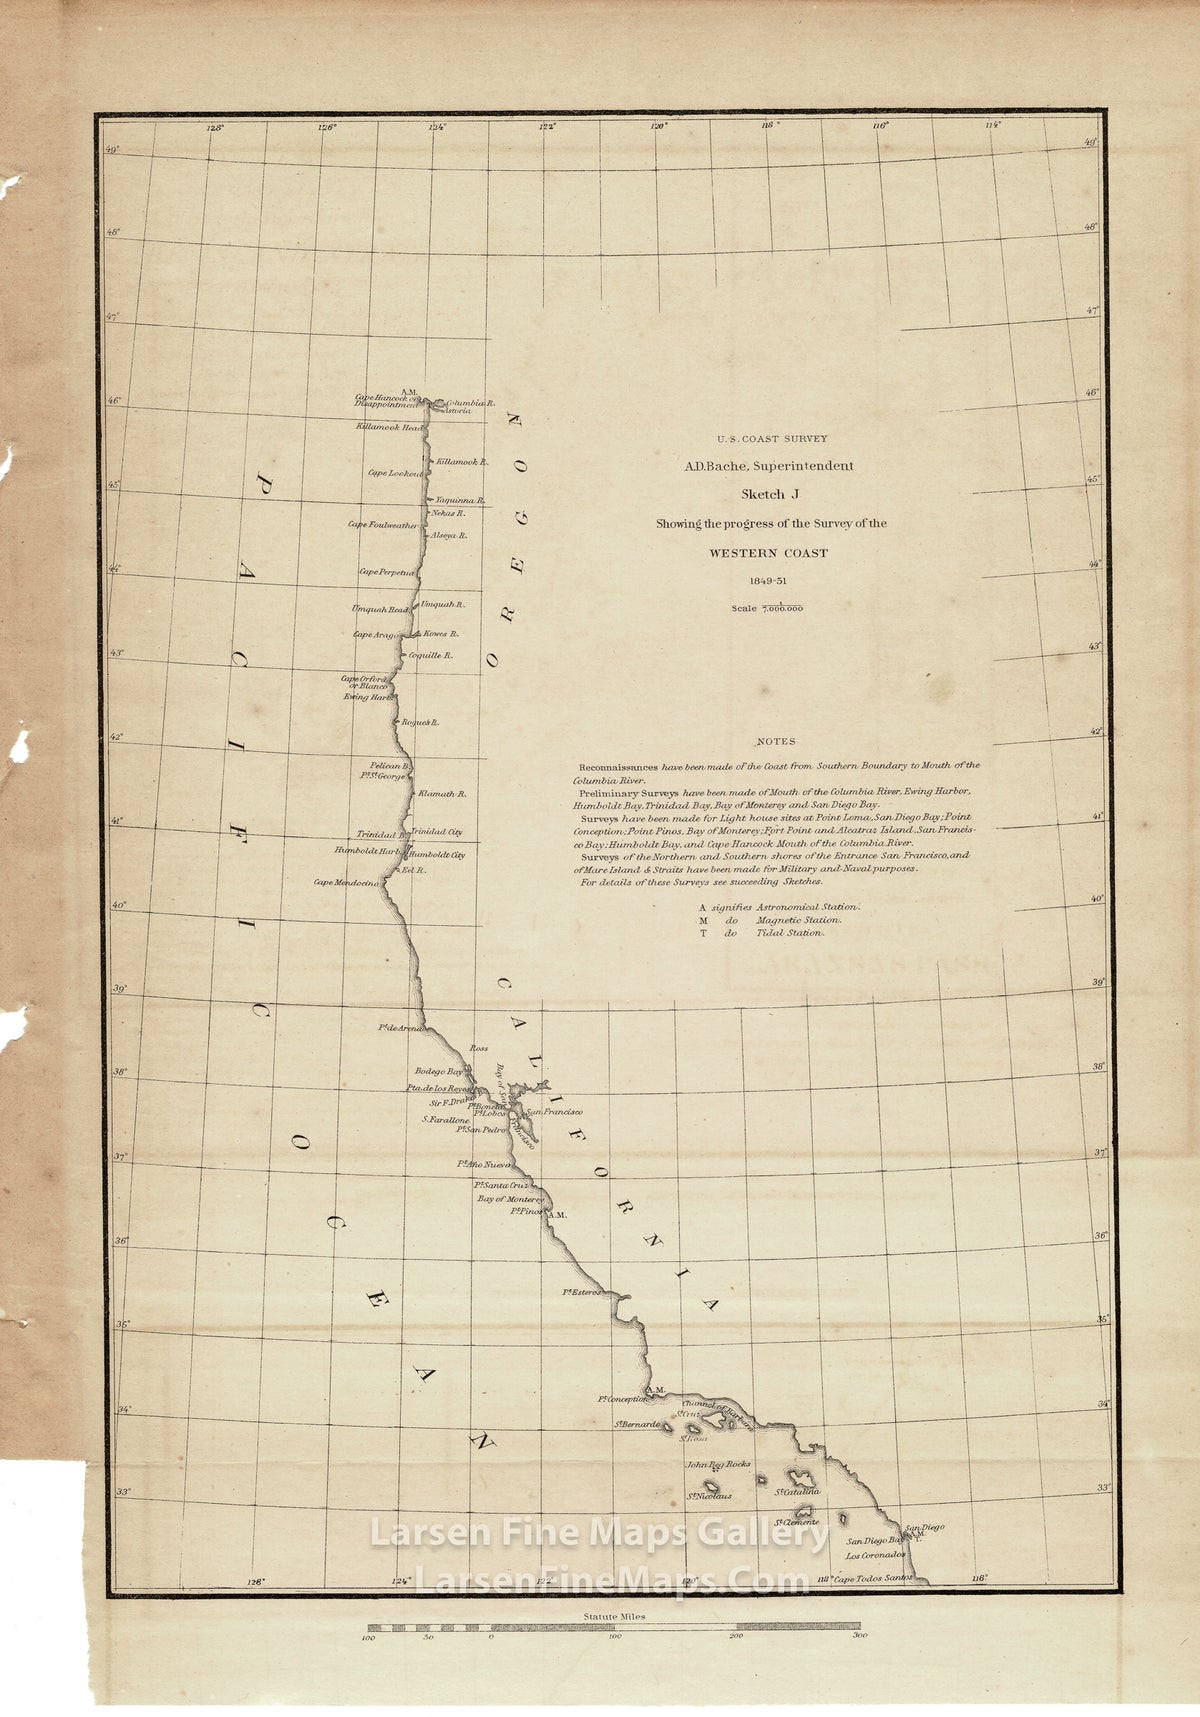 Sketch J Showing the Progress of the Survey of the Western Coast 1849-51